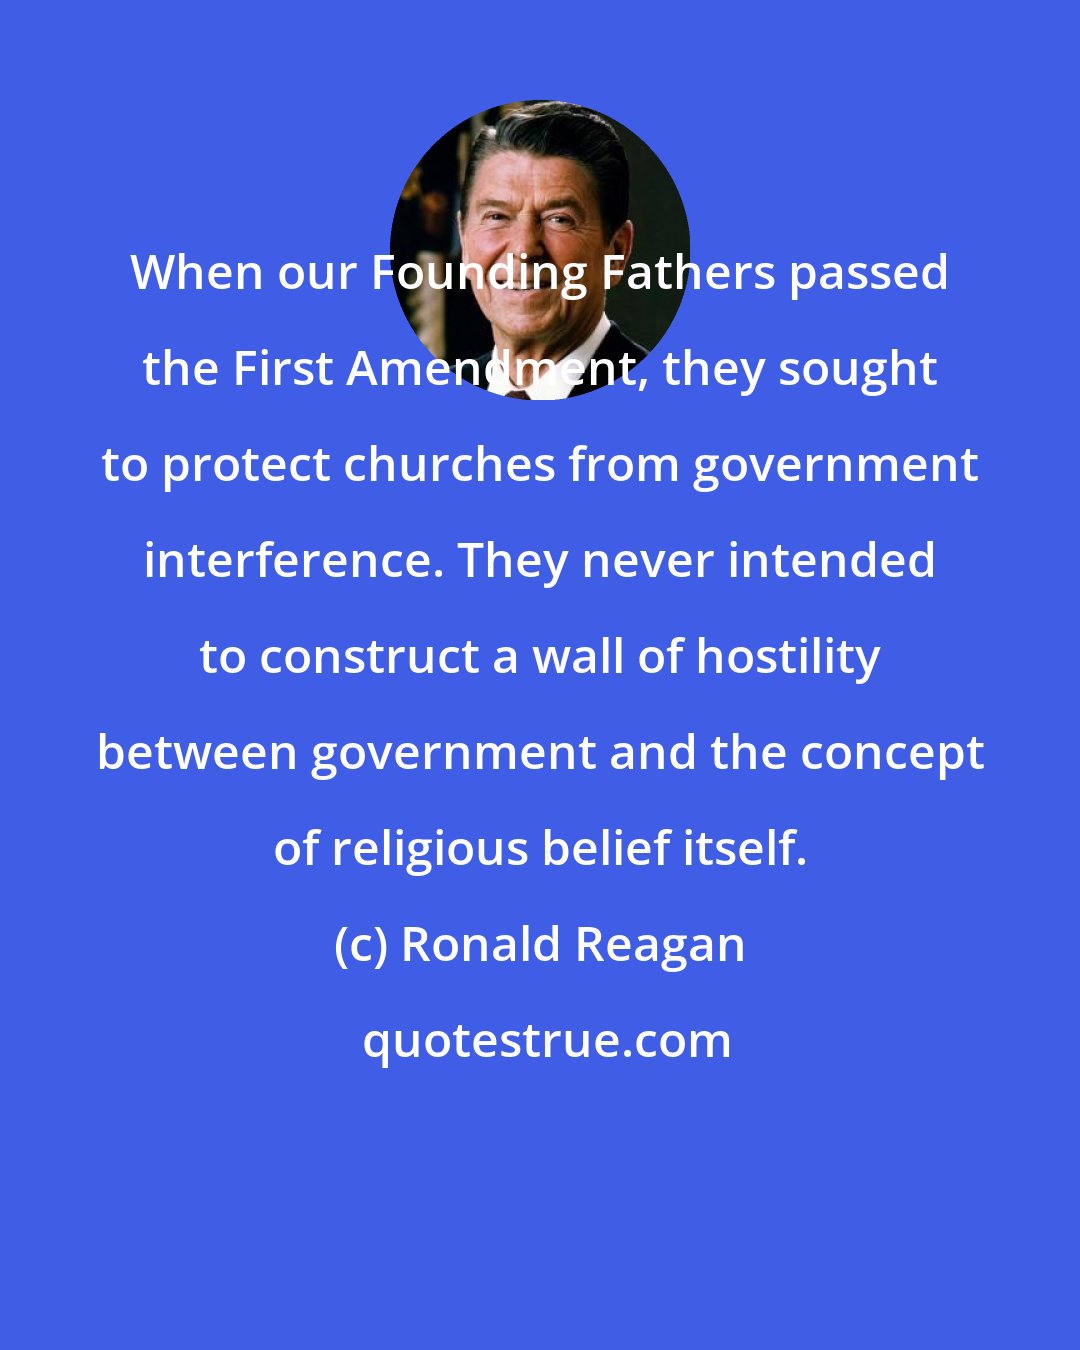 Ronald Reagan: When our Founding Fathers passed the First Amendment, they sought to protect churches from government interference. They never intended to construct a wall of hostility between government and the concept of religious belief itself.